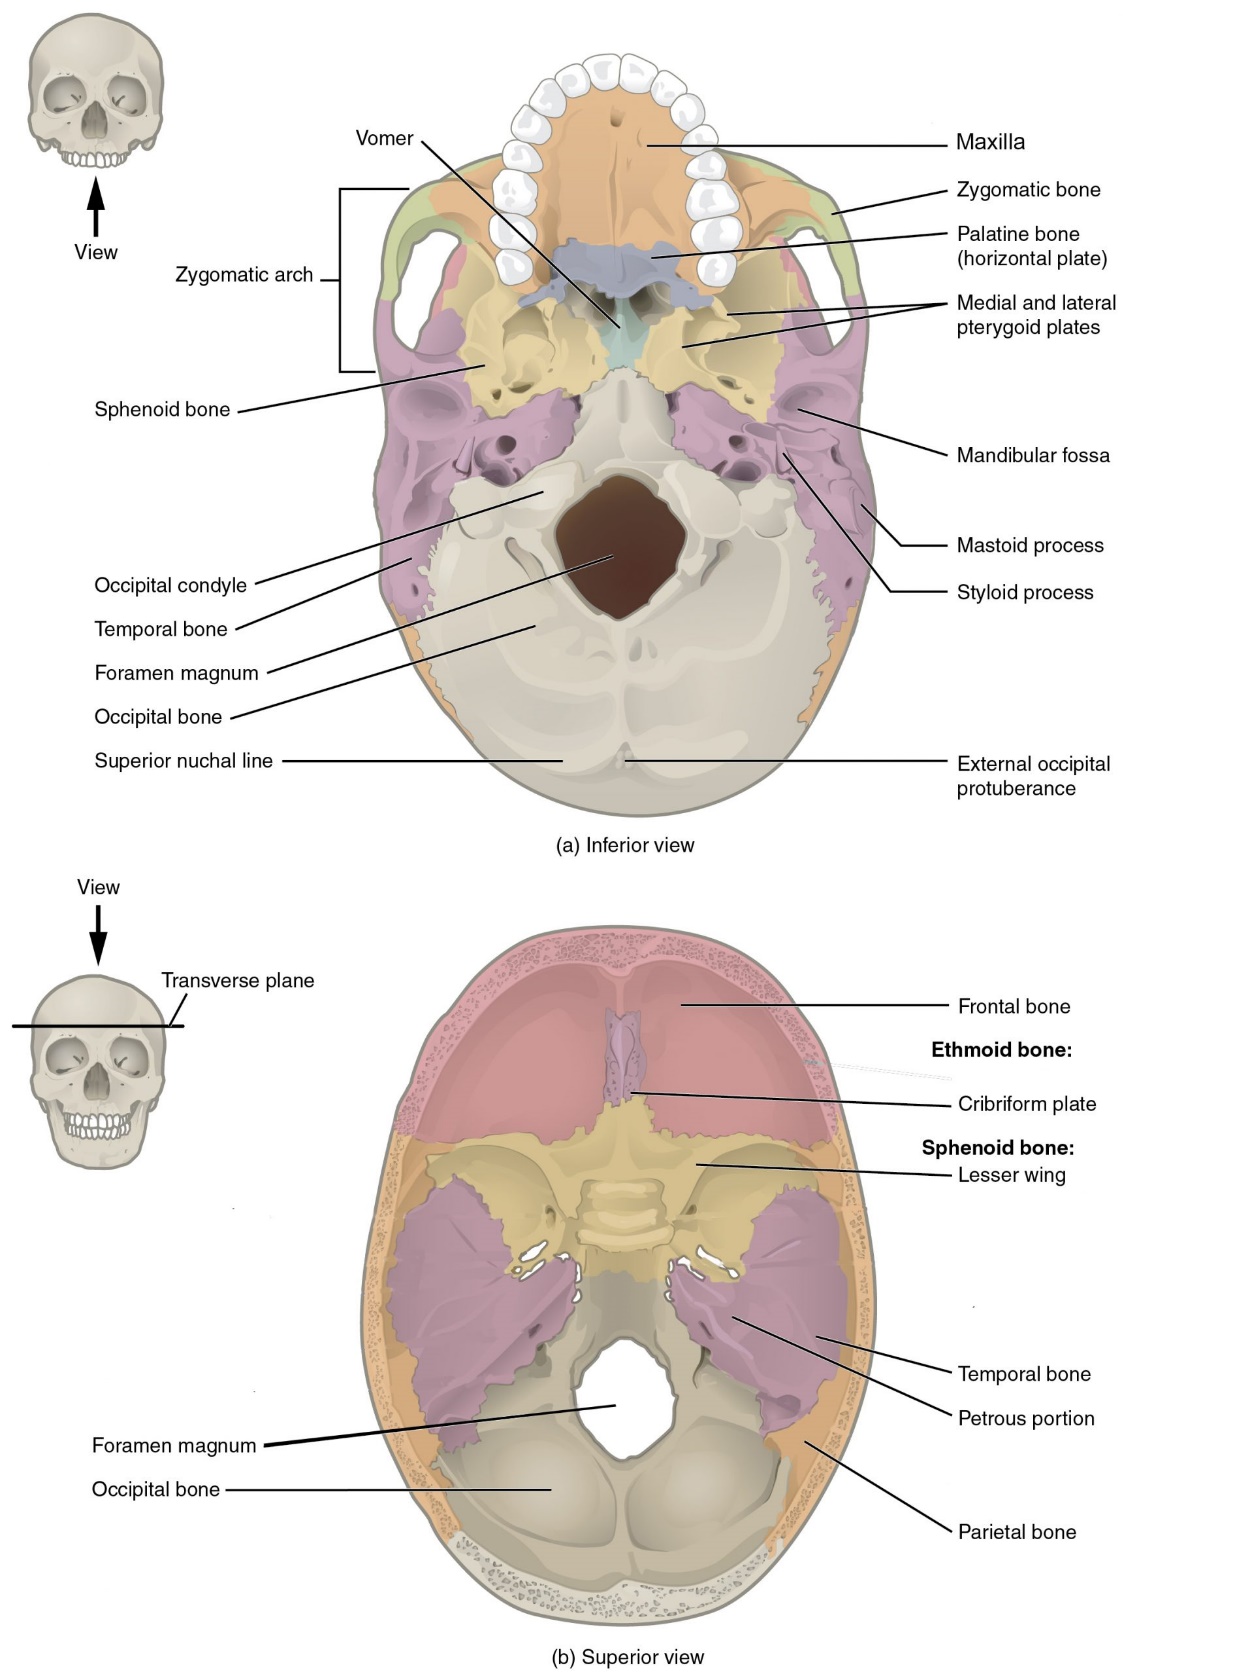 (a) The base of the cranium (b) The floor of the cranial cavity.